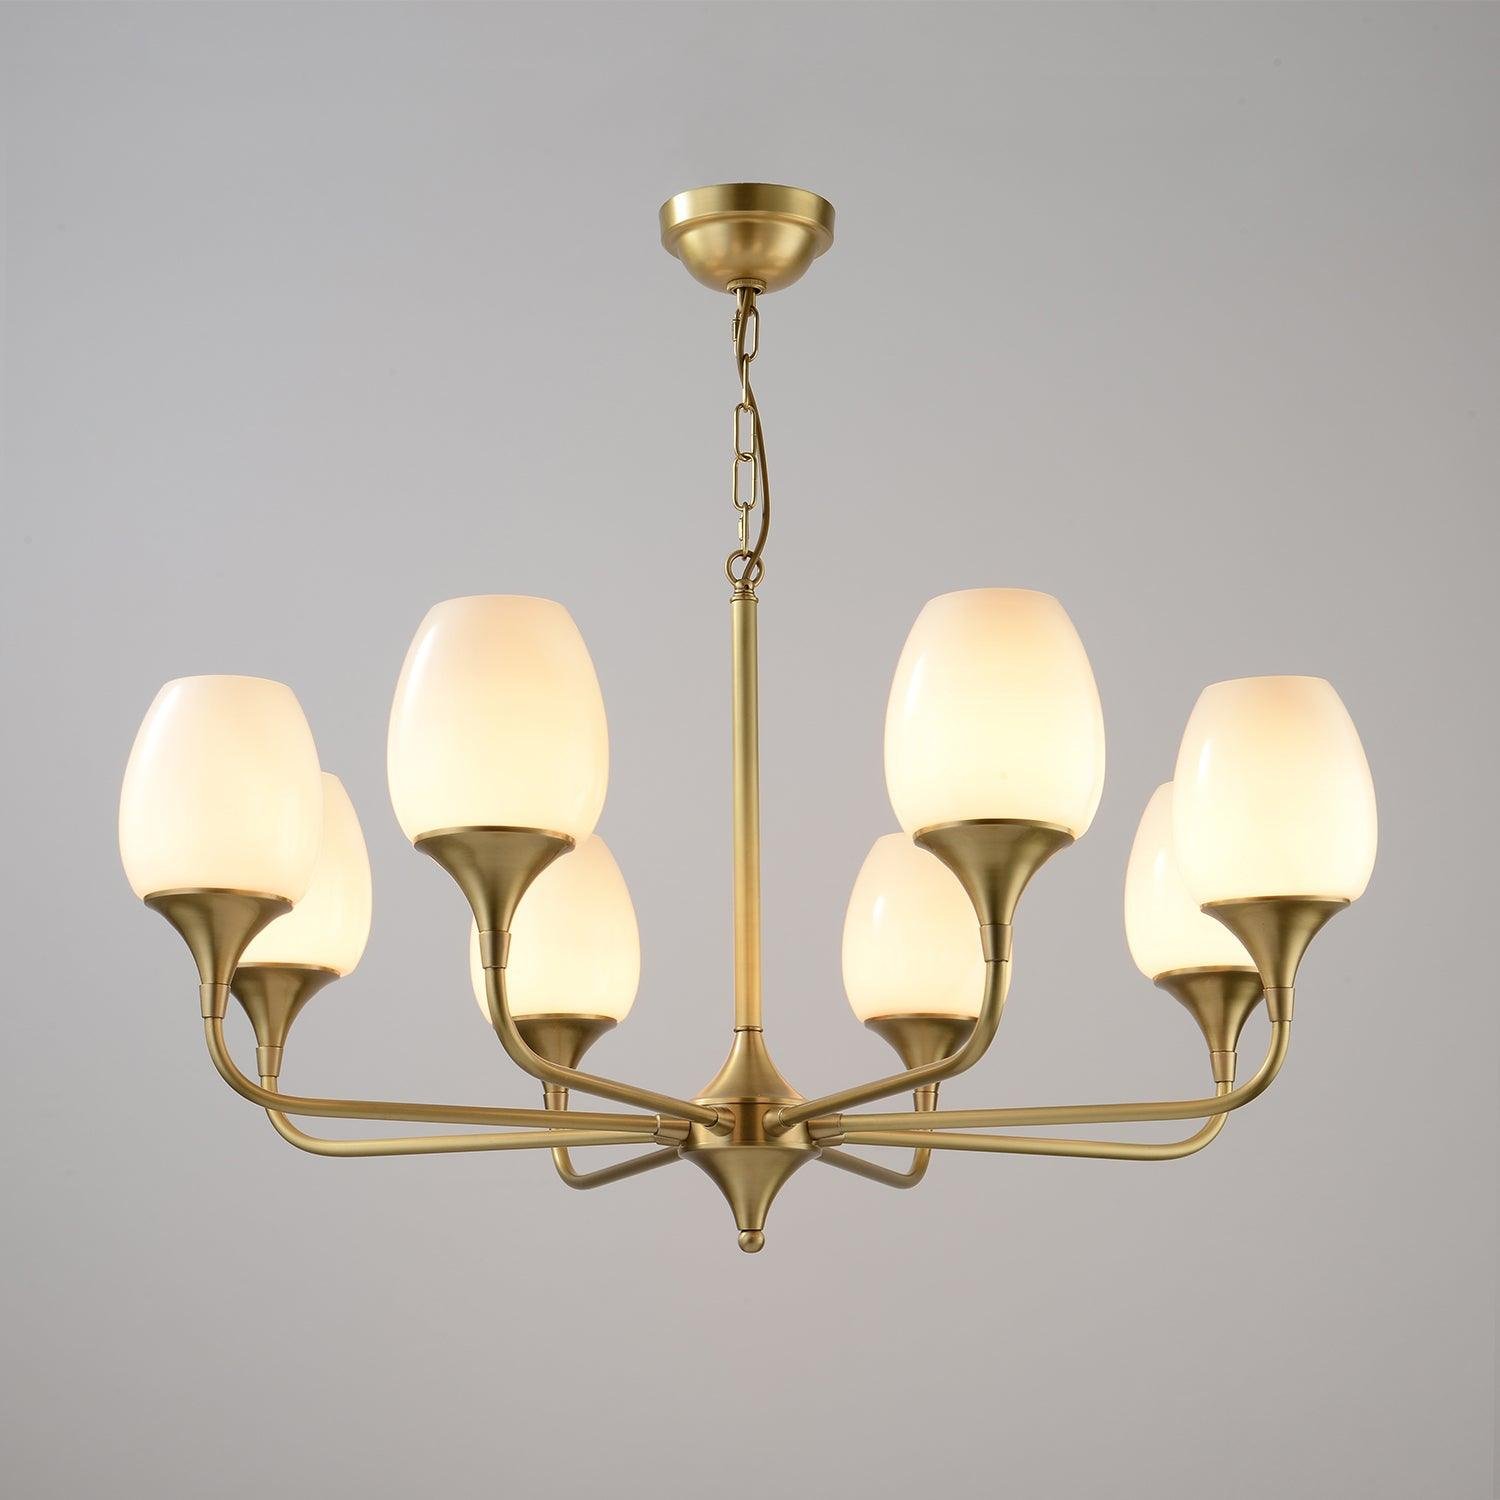 Brass Charlie Chandelier with 8 Heads, Diameter 34.6 inches x Height 21.7 inches (88cm x 55cm)